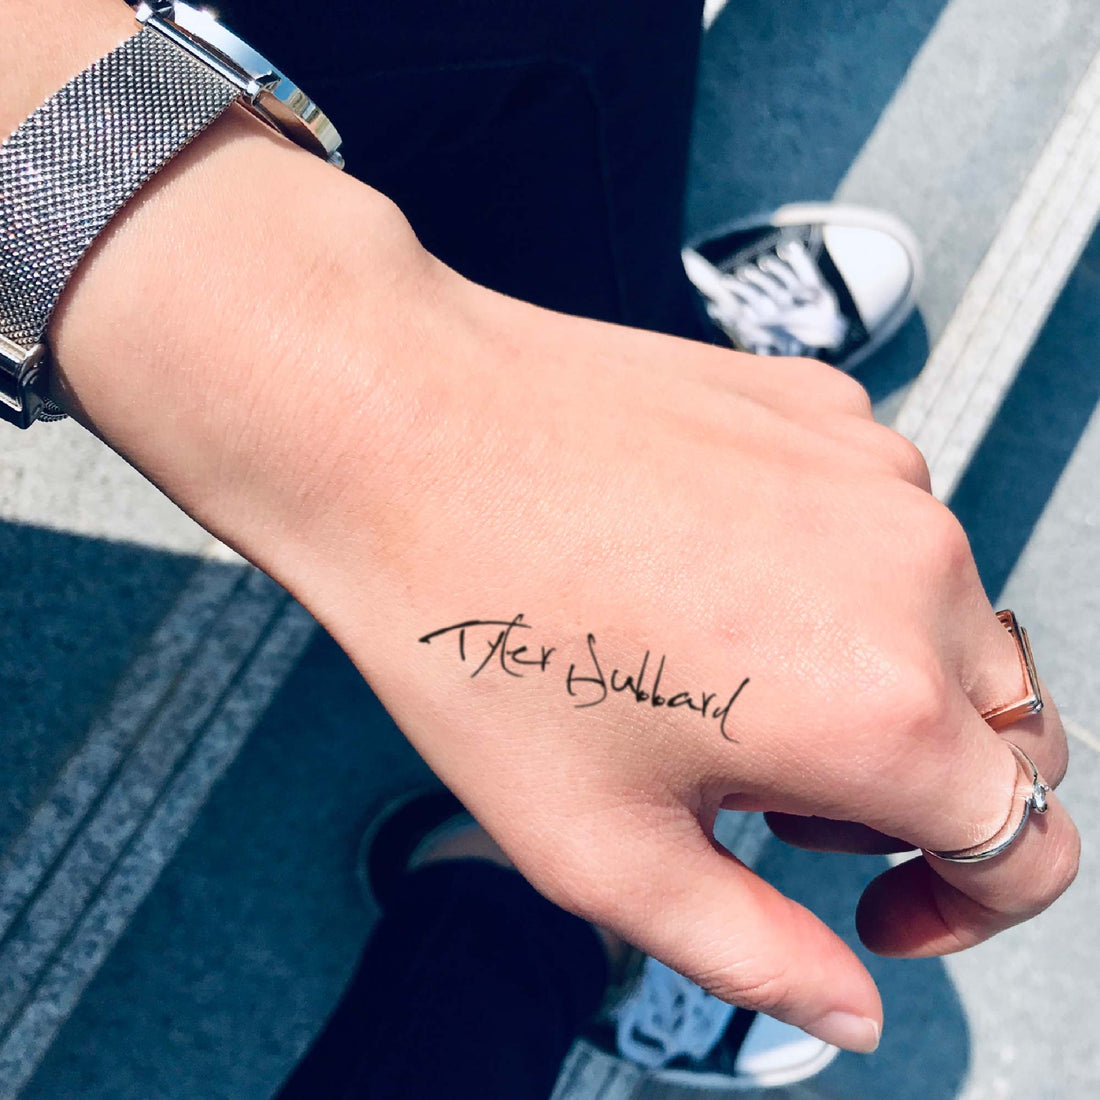 Tyler Hubbard custom temporary tattoo sticker design idea inspiration meanings removal arm wrist hand words font name signature calligraphy lyrics tour concert outfits merch accessory gift souvenir costumes wear dress up code